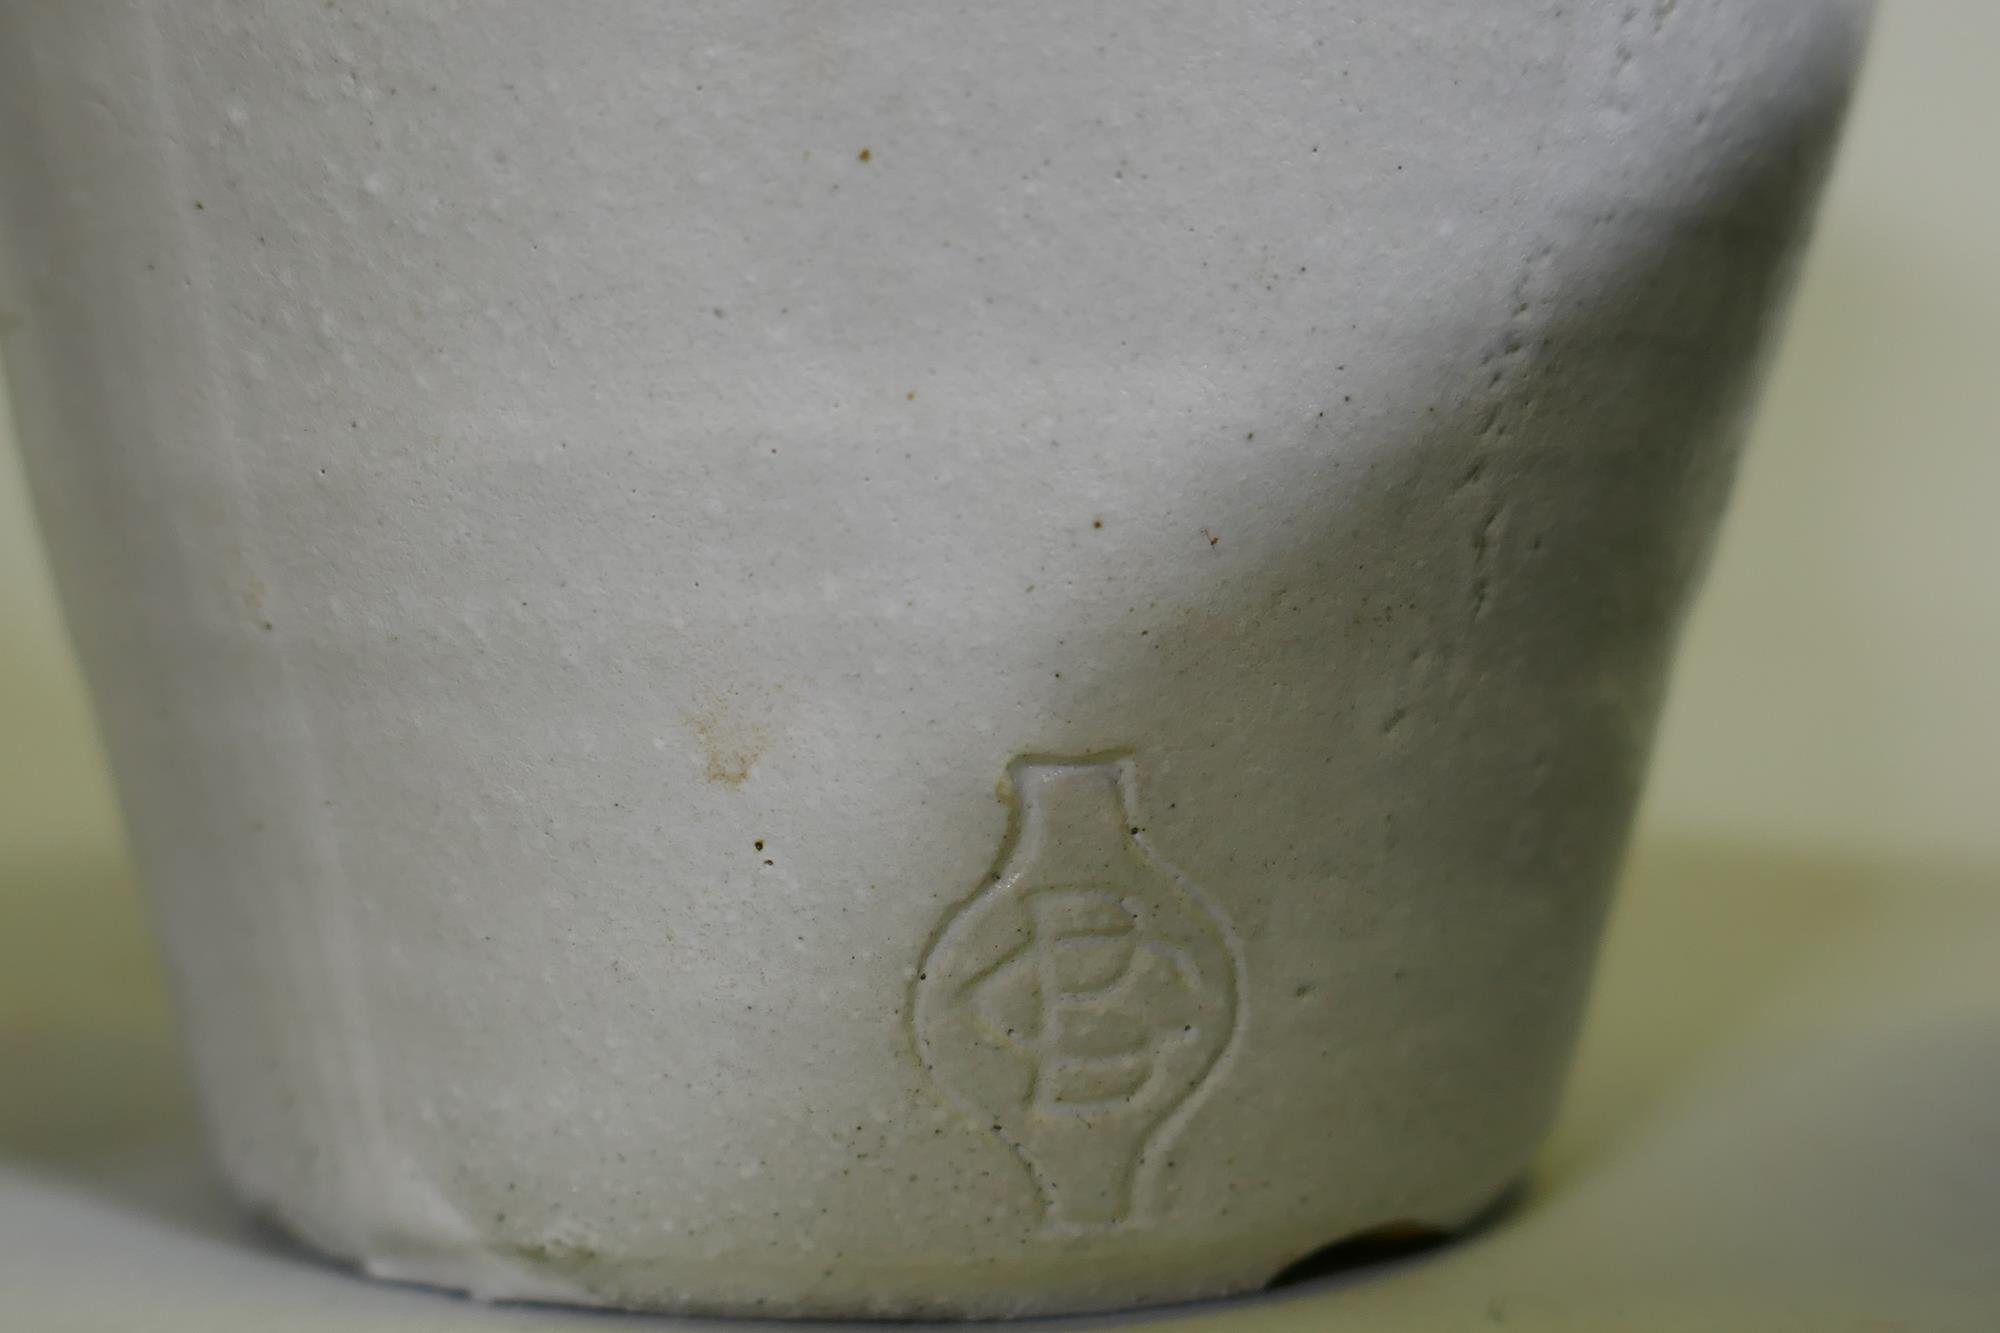 Clive Pearson for Clovelly Pottery, vase, 17cm high, a Bristol Pottery vase, a Lamorna Pottery vase, - Image 6 of 9